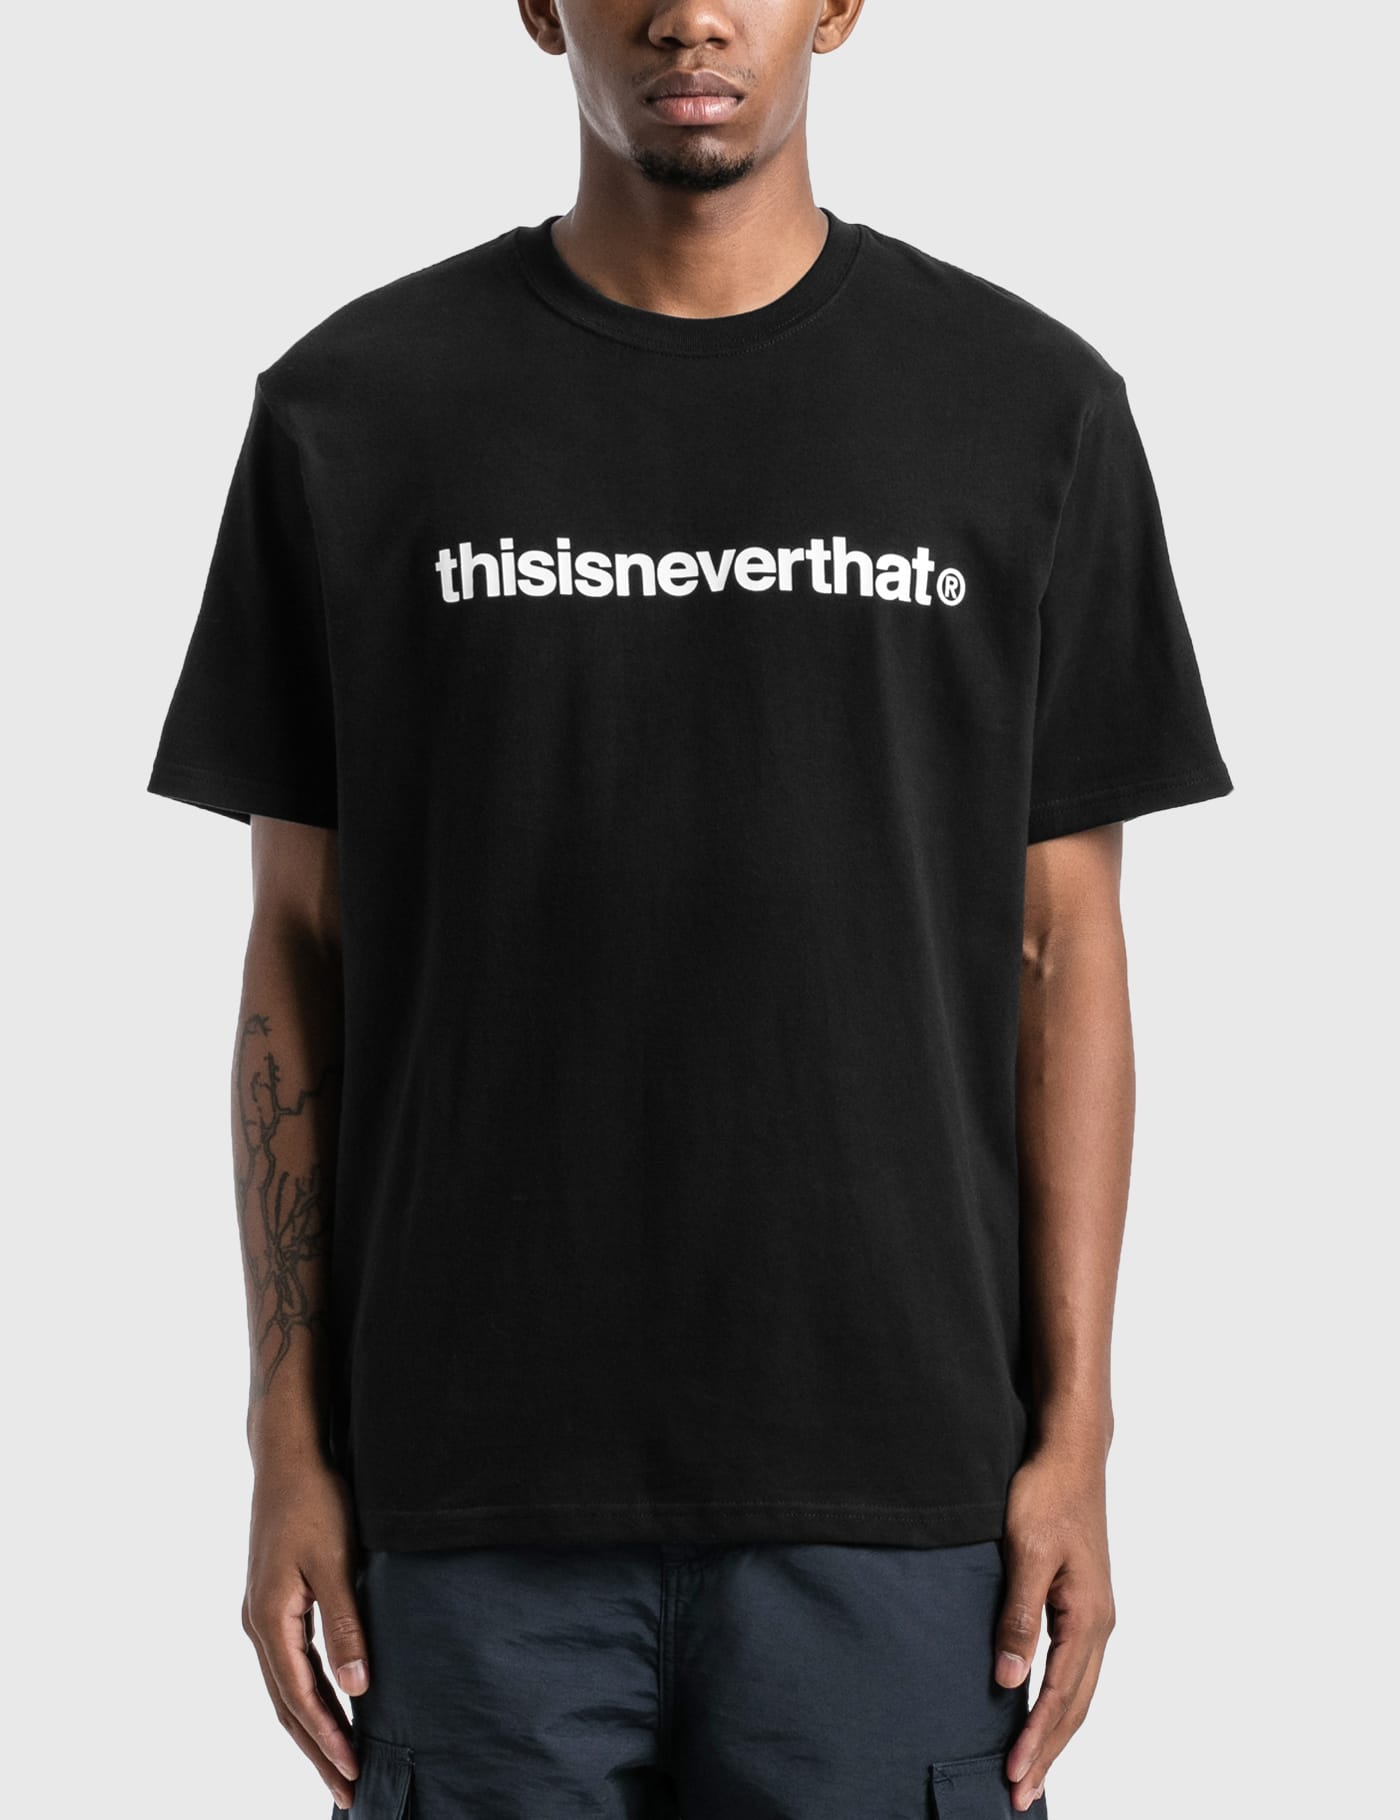 Thisisneverthat - thisisneverthat T-logo T-Shirt | HBX - Globally Curated  Fashion and Lifestyle by Hypebeast